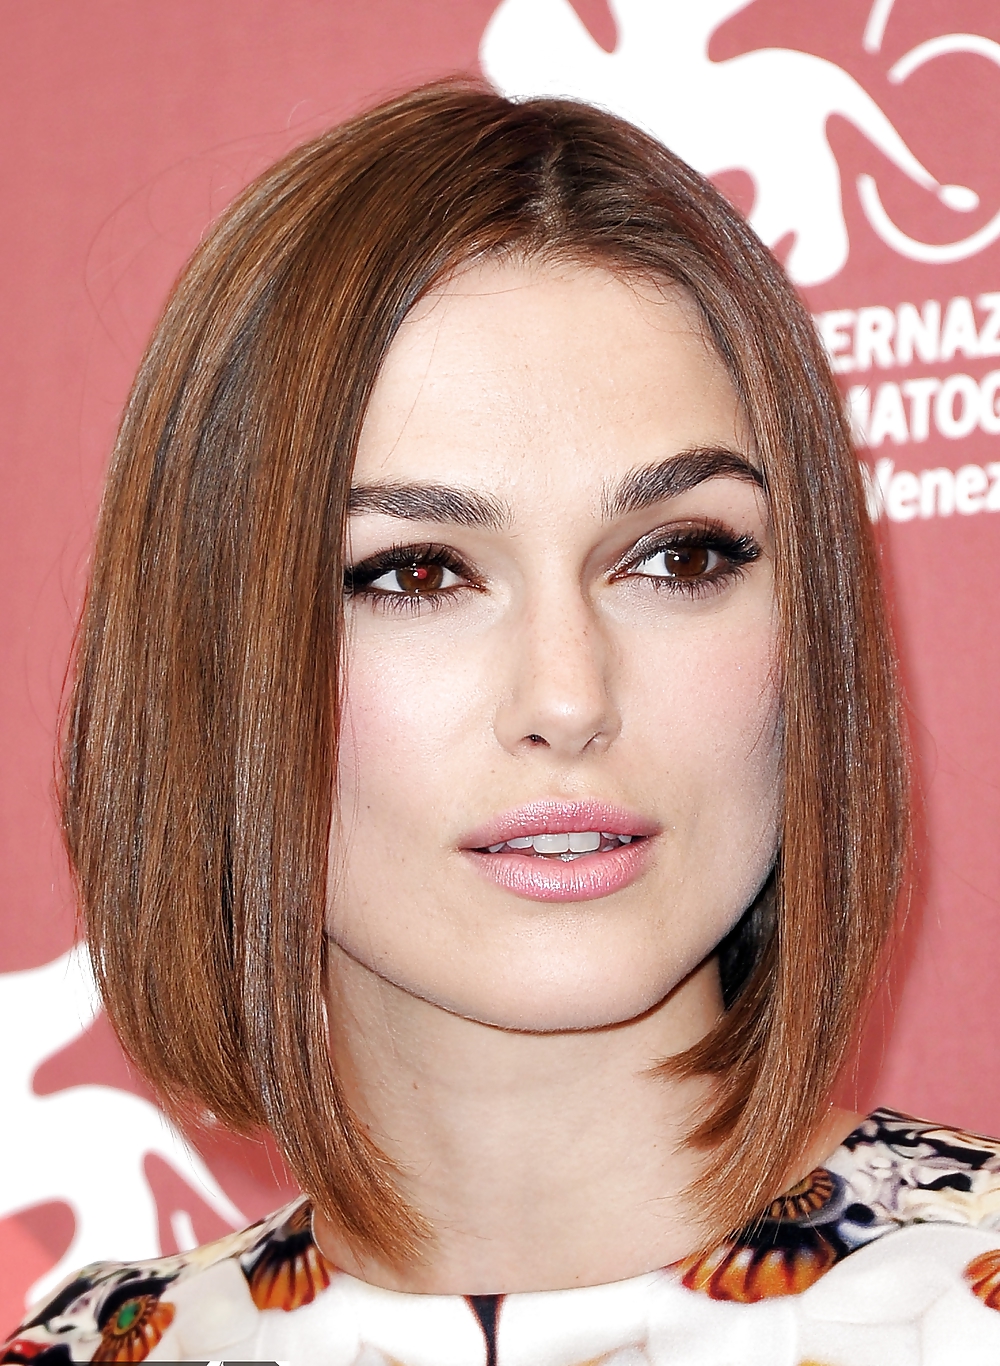 Keira Knightley The Royal Lady of England #35650238